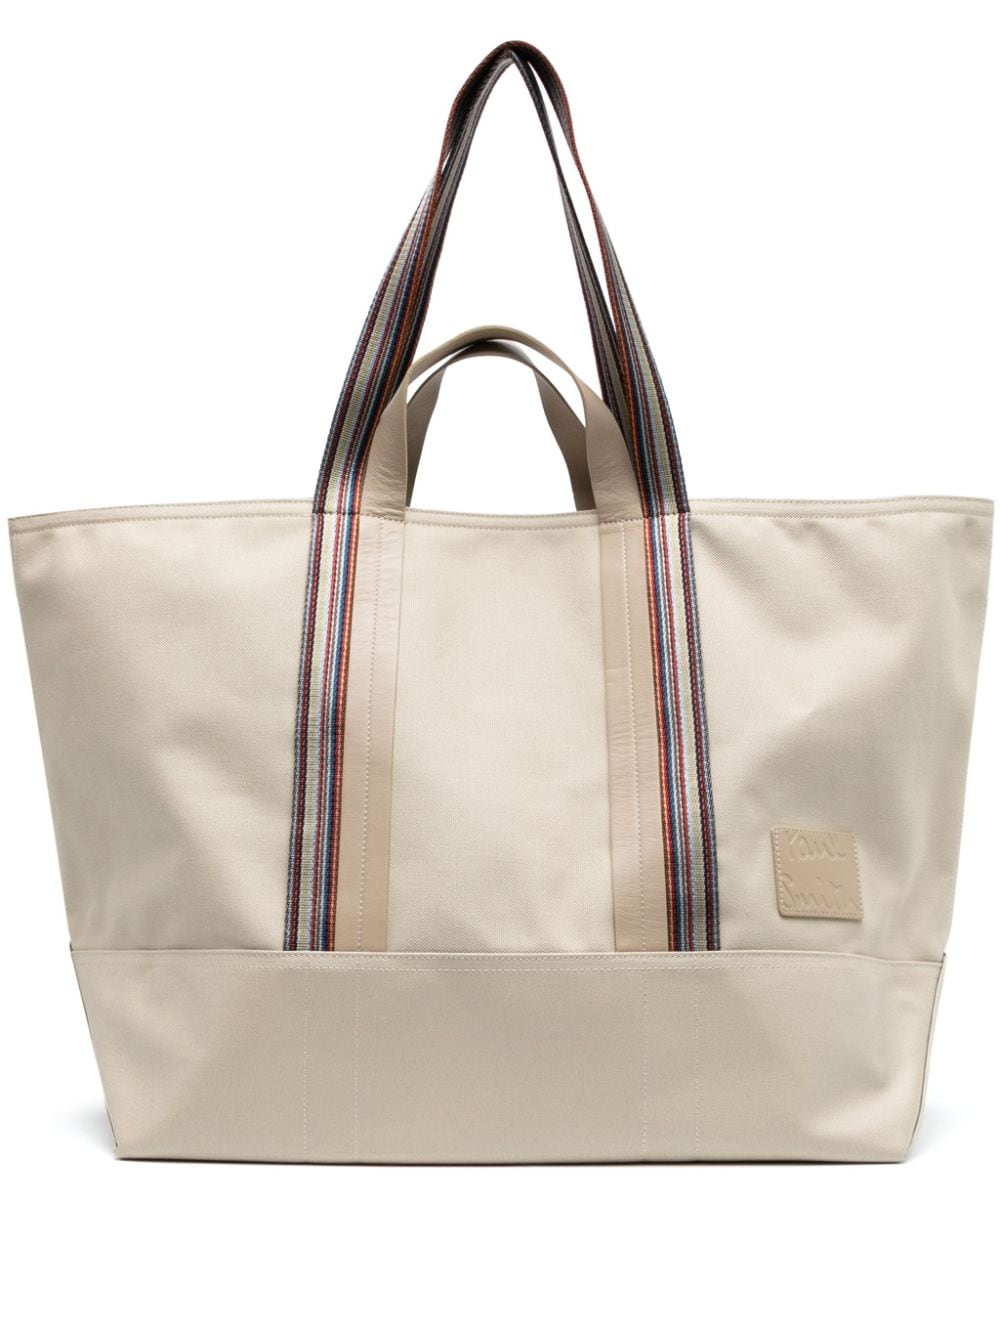 Paul Smith logo-patch tote bag - Brown von Paul Smith